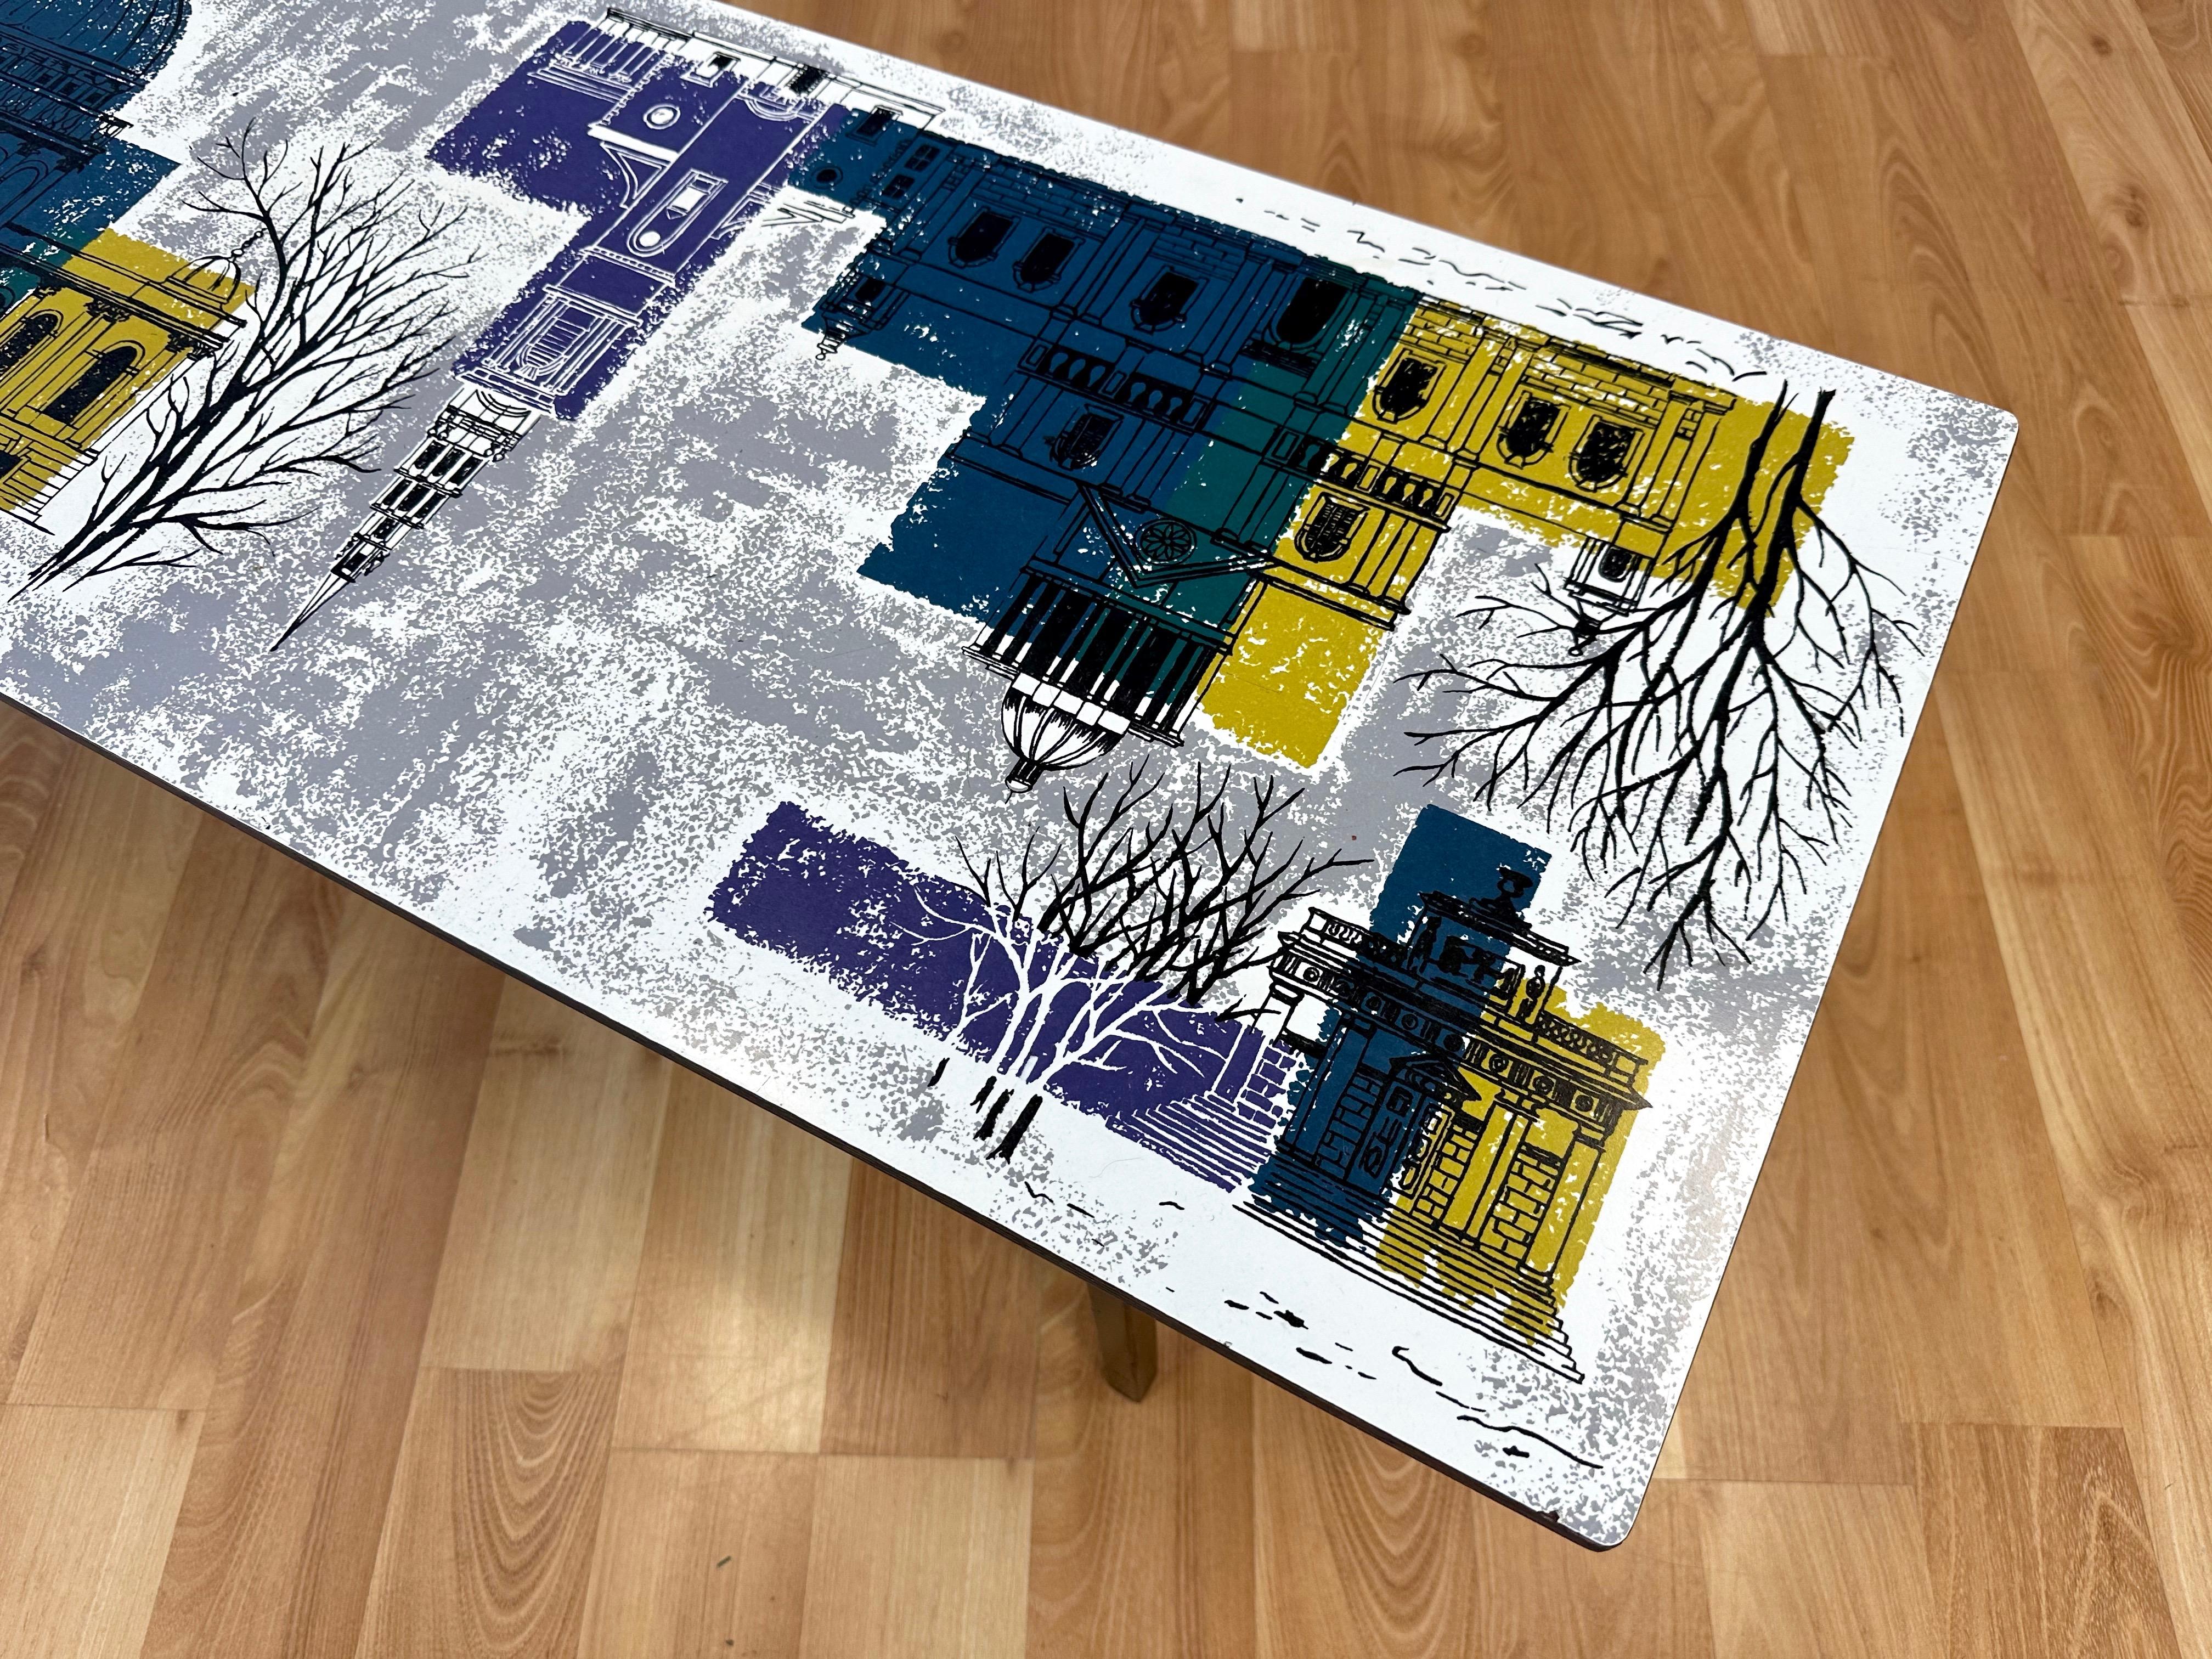 John Piper London Skyline Coffee Table by Myer for Conran and Heal’s, c. 1960 For Sale 11